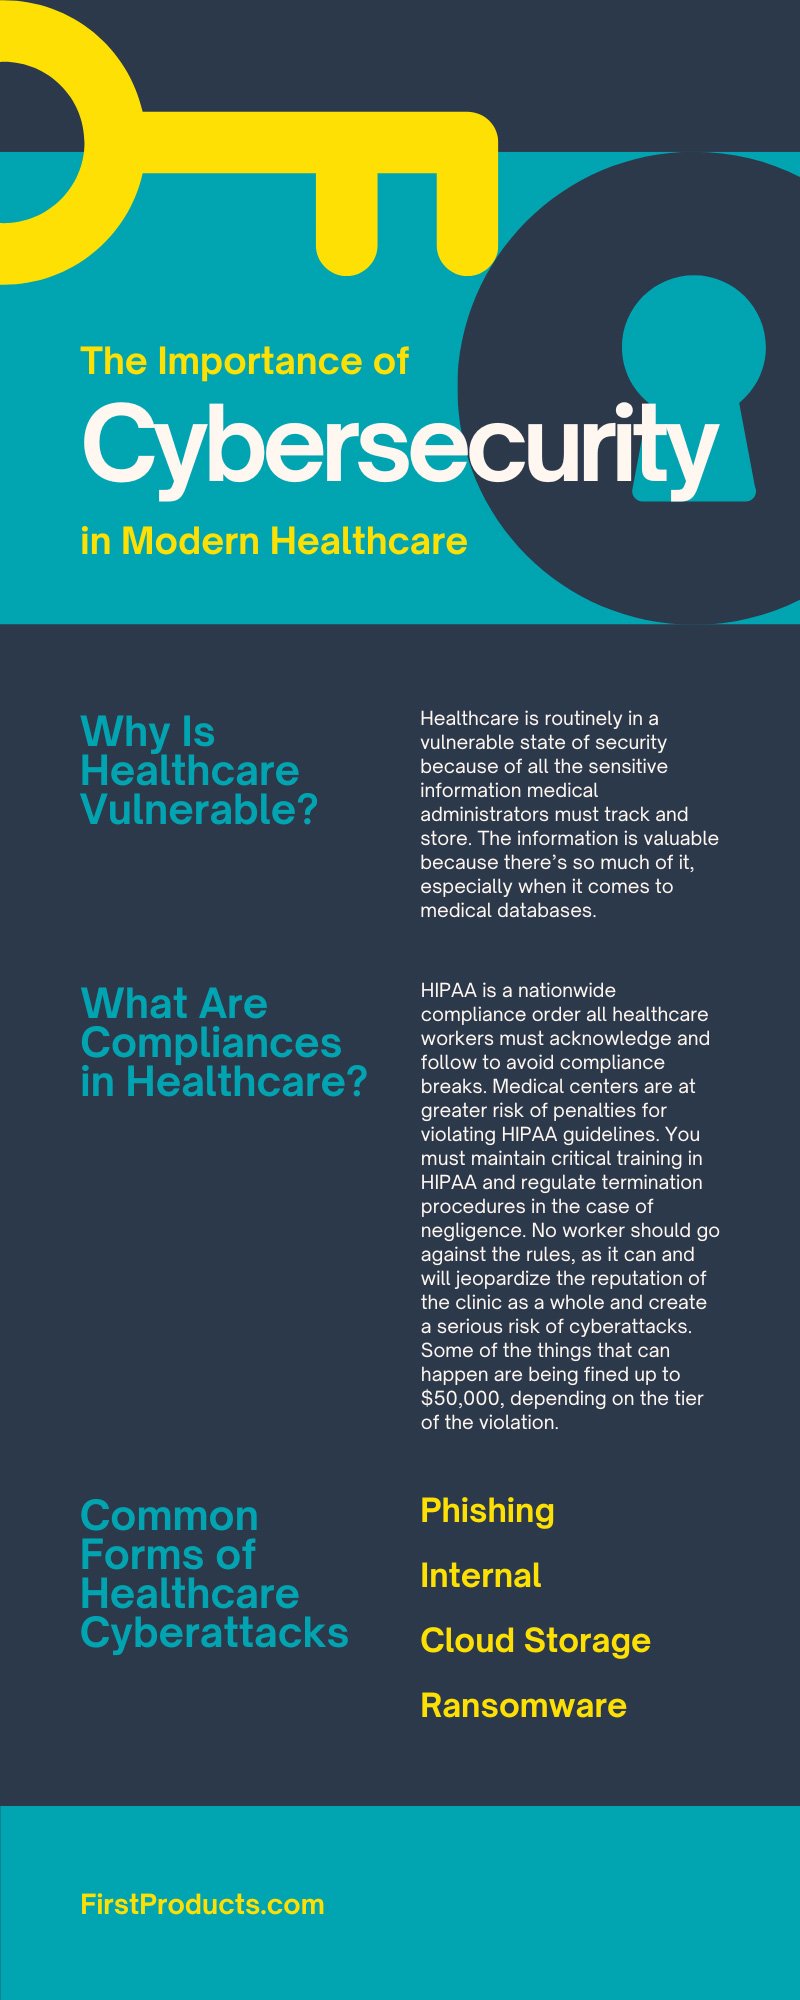 The Importance of Cybersecurity in Modern Healthcare